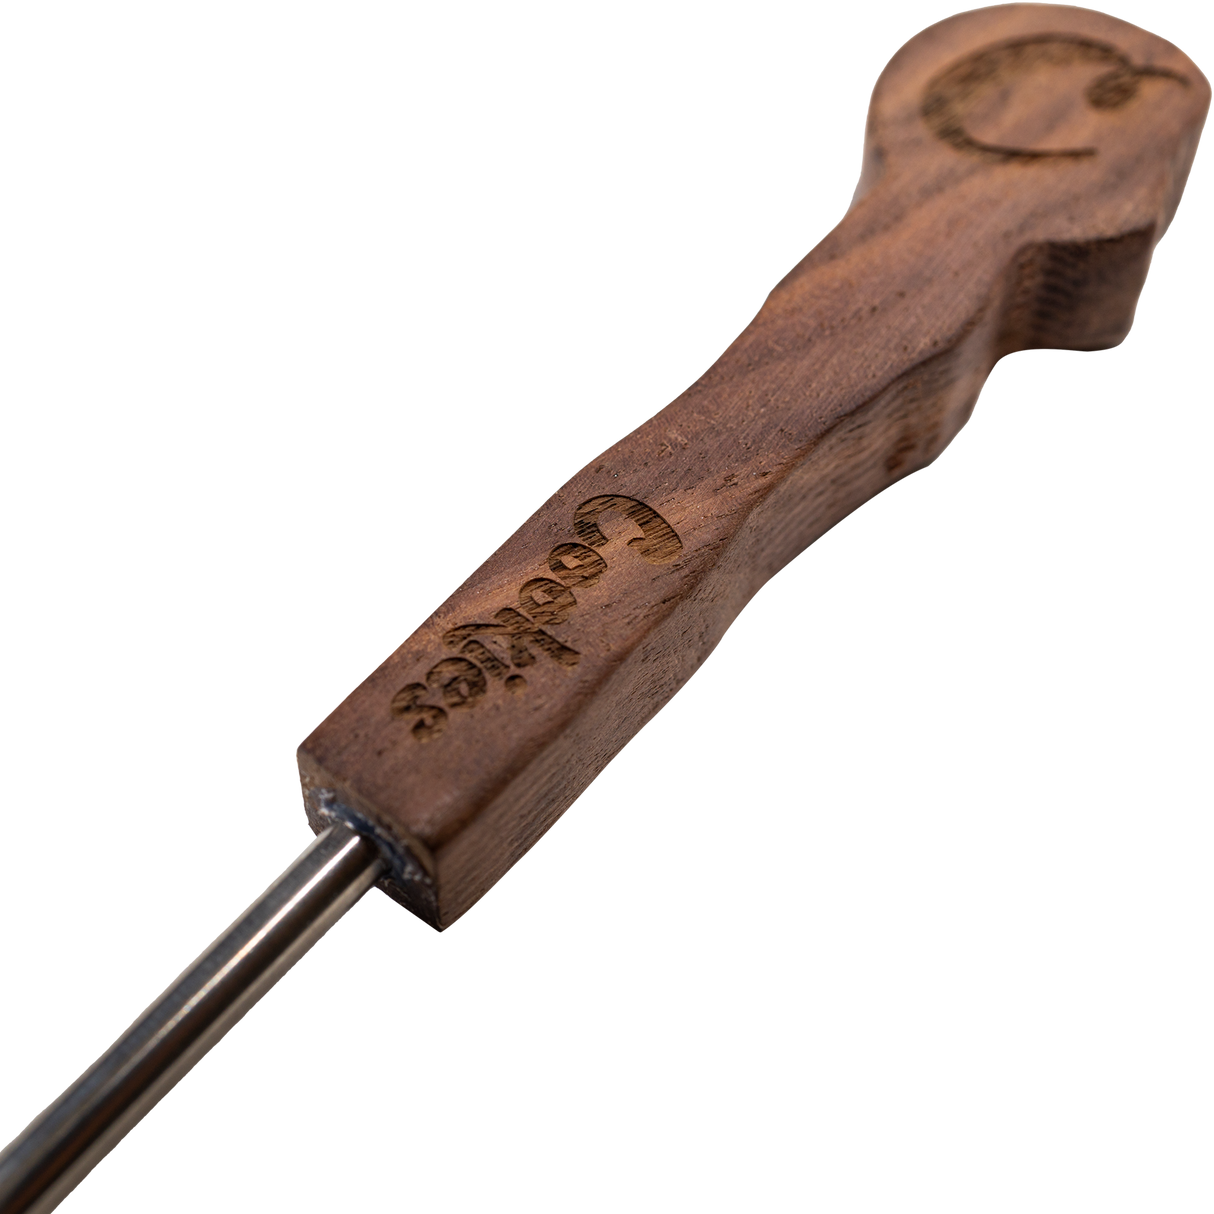 Cookies Wax Tool with Titanium Scoop and Wooden Handle - Close-Up